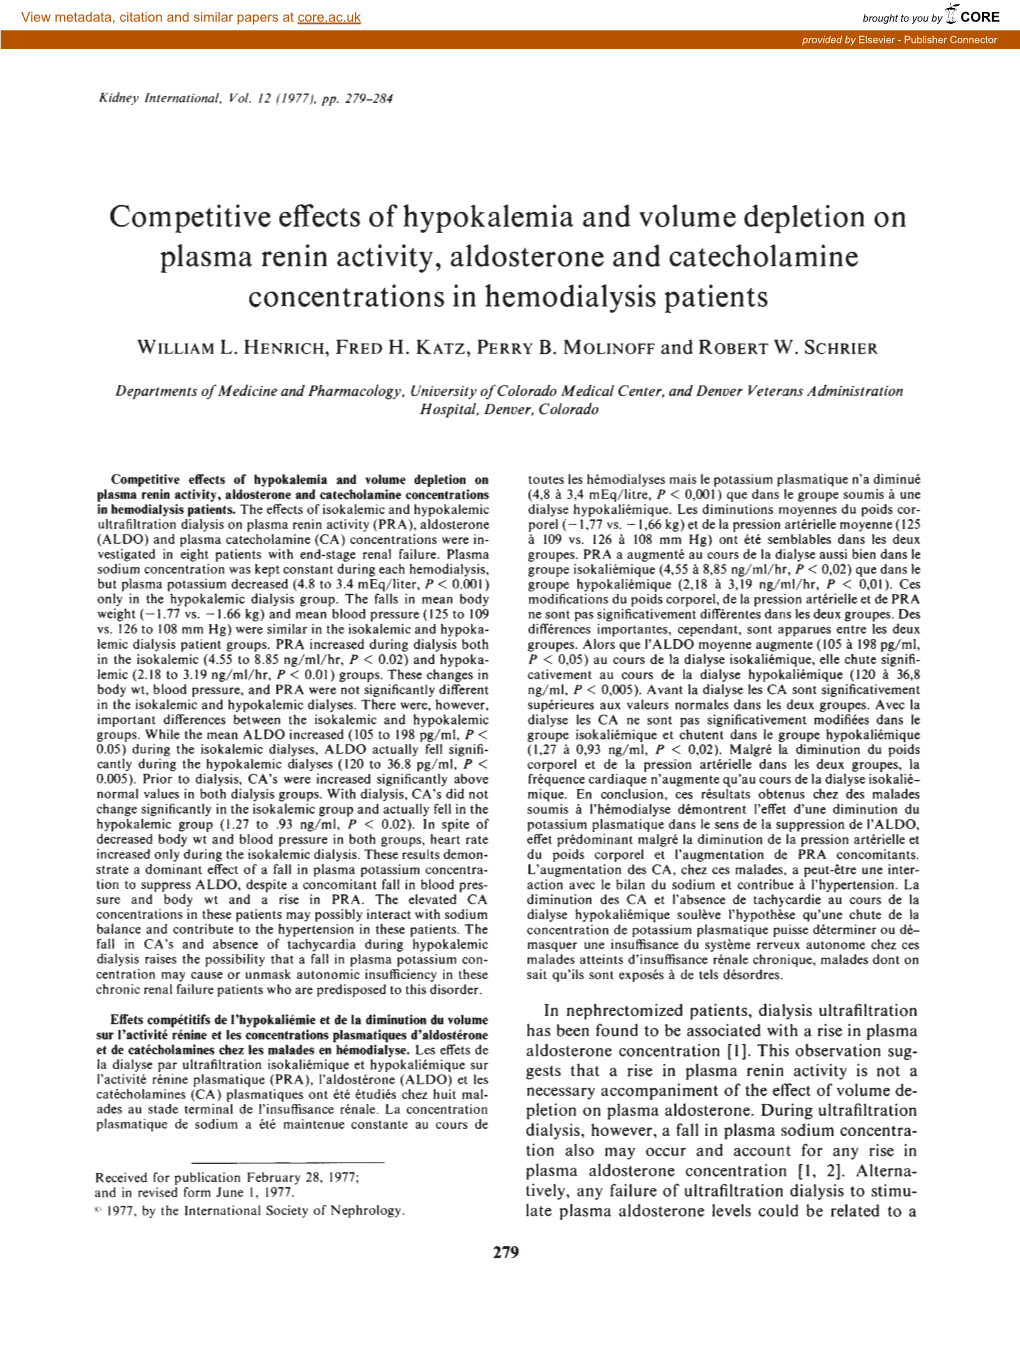 Competitive Effects of Hypokalemia and Volume Depletion on Plasma Renin Activity, Aldosterone and Catecholamine Concentrations in Hemodialysis Patients